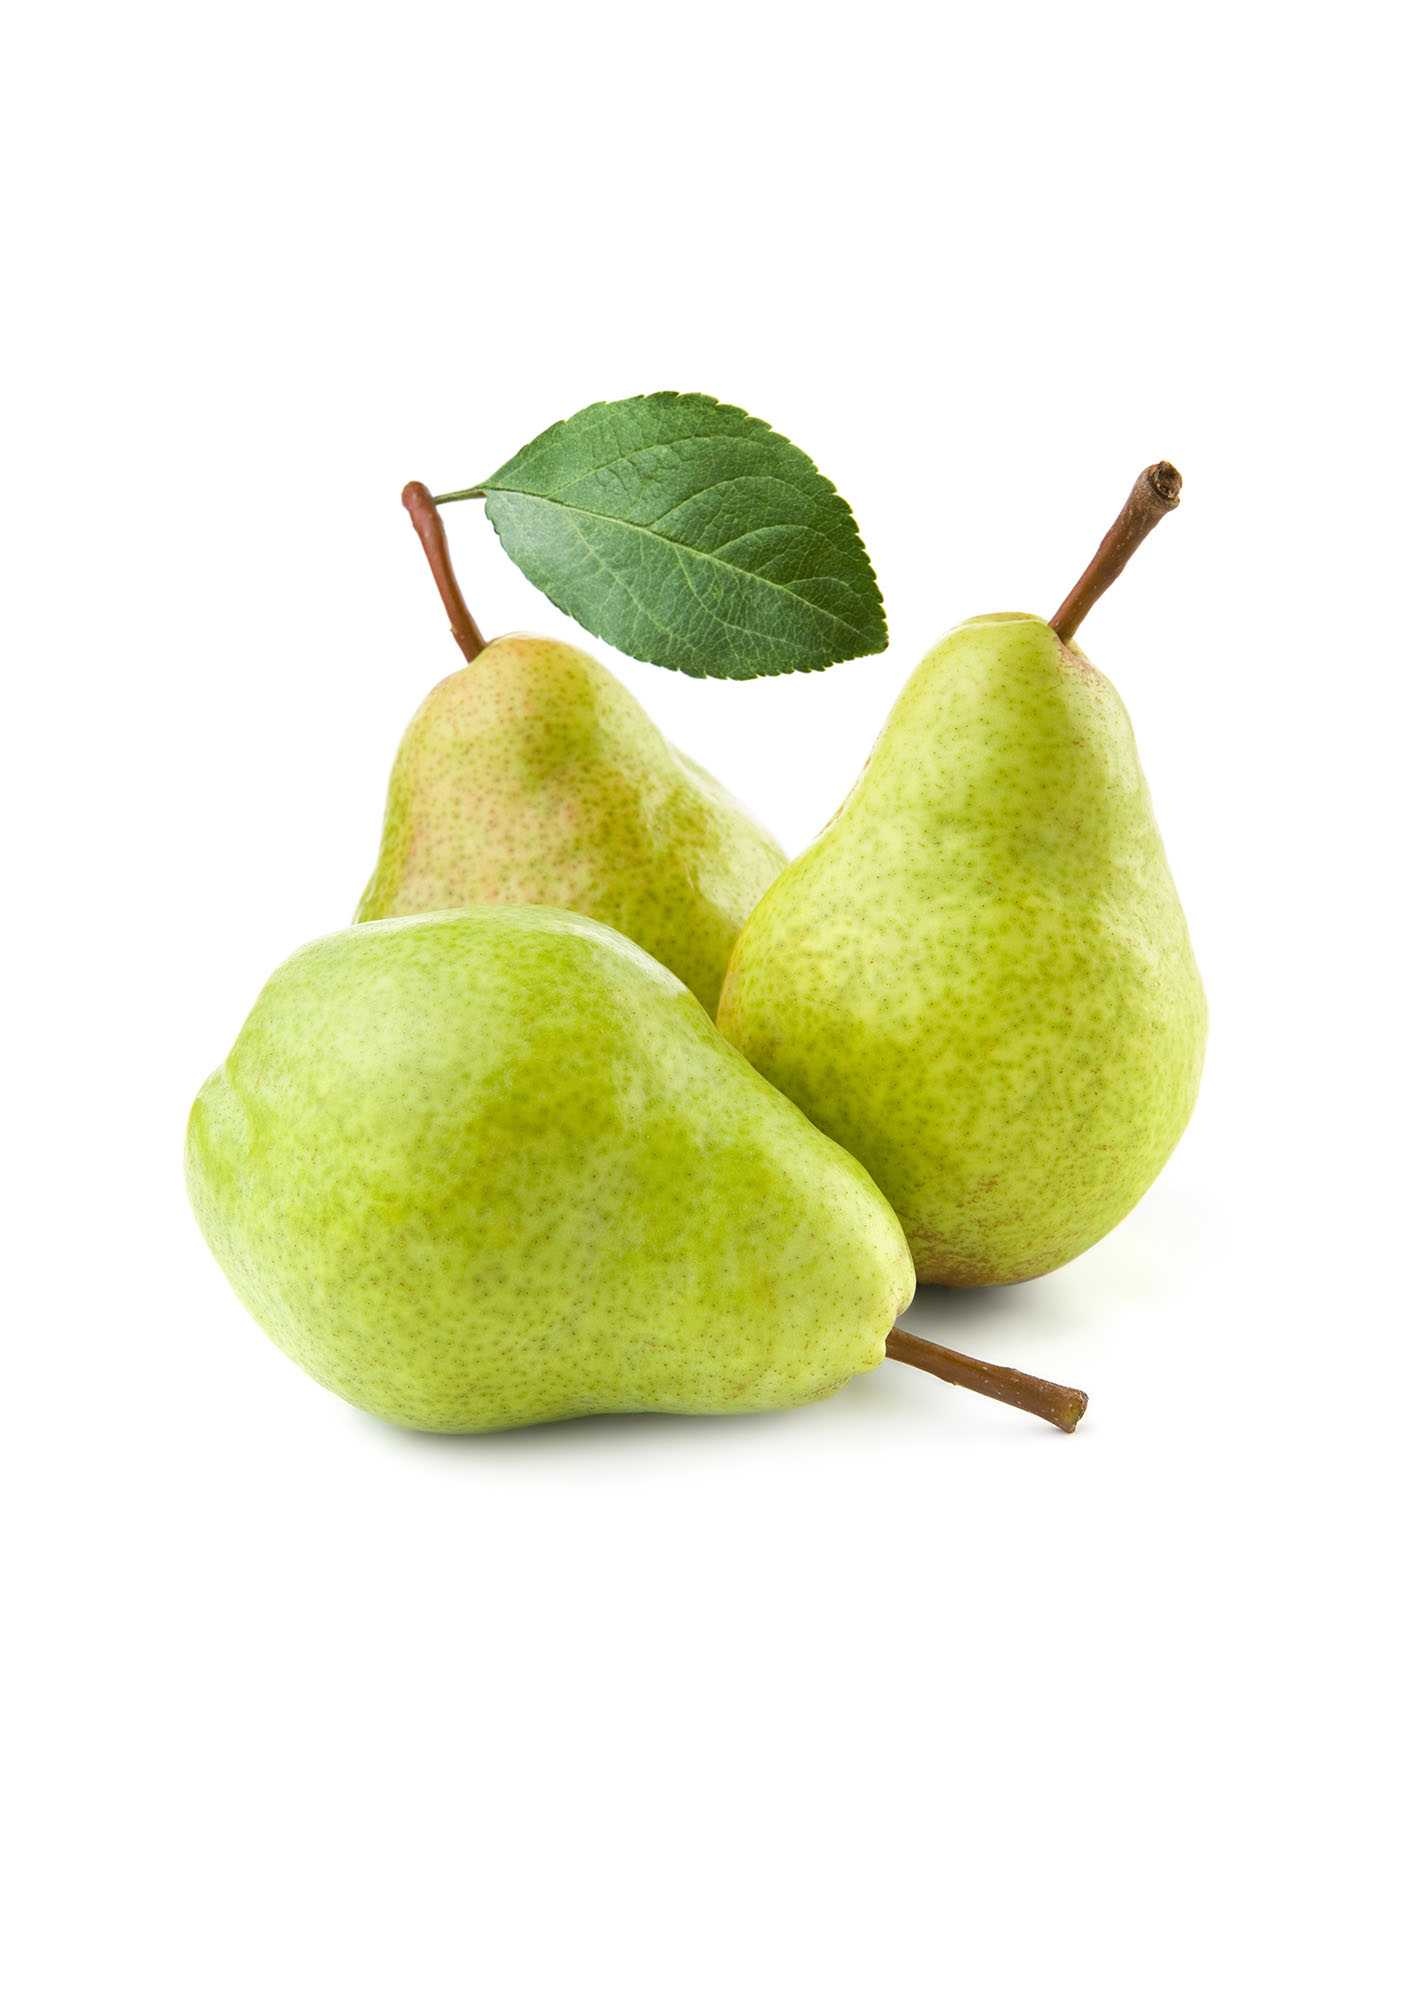 Pear image classifcation dataset for machine learning